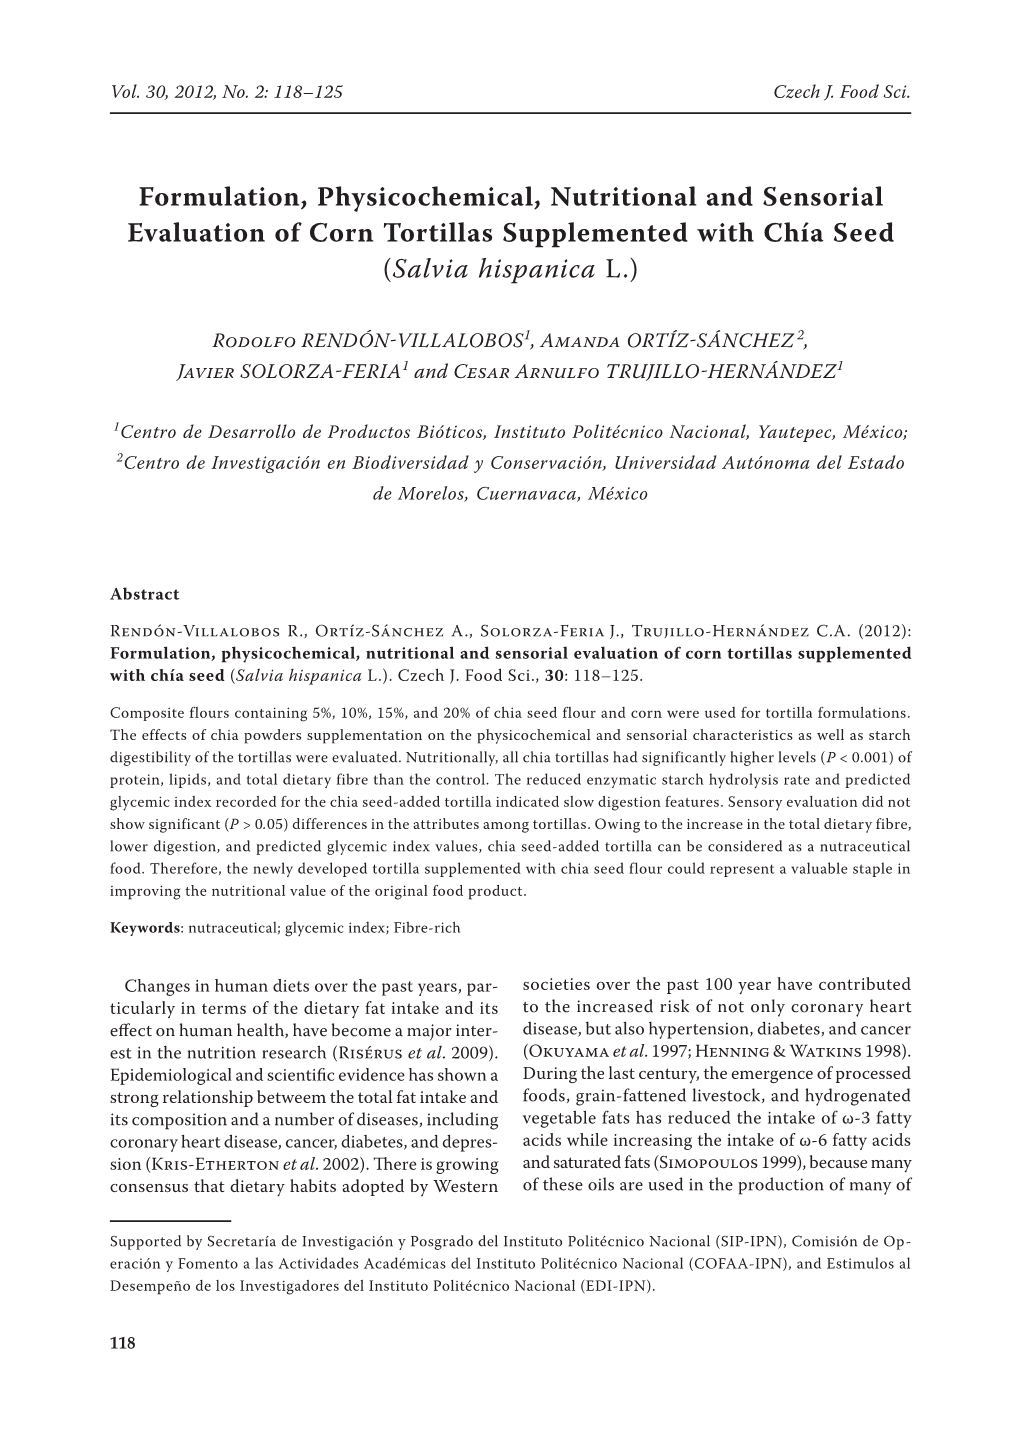 Formulation, Physicochemical, Nutritional and Sensorial Evaluation of Corn Tortillas Supplemented with Chía Seed (Salvia Hispanica L.)